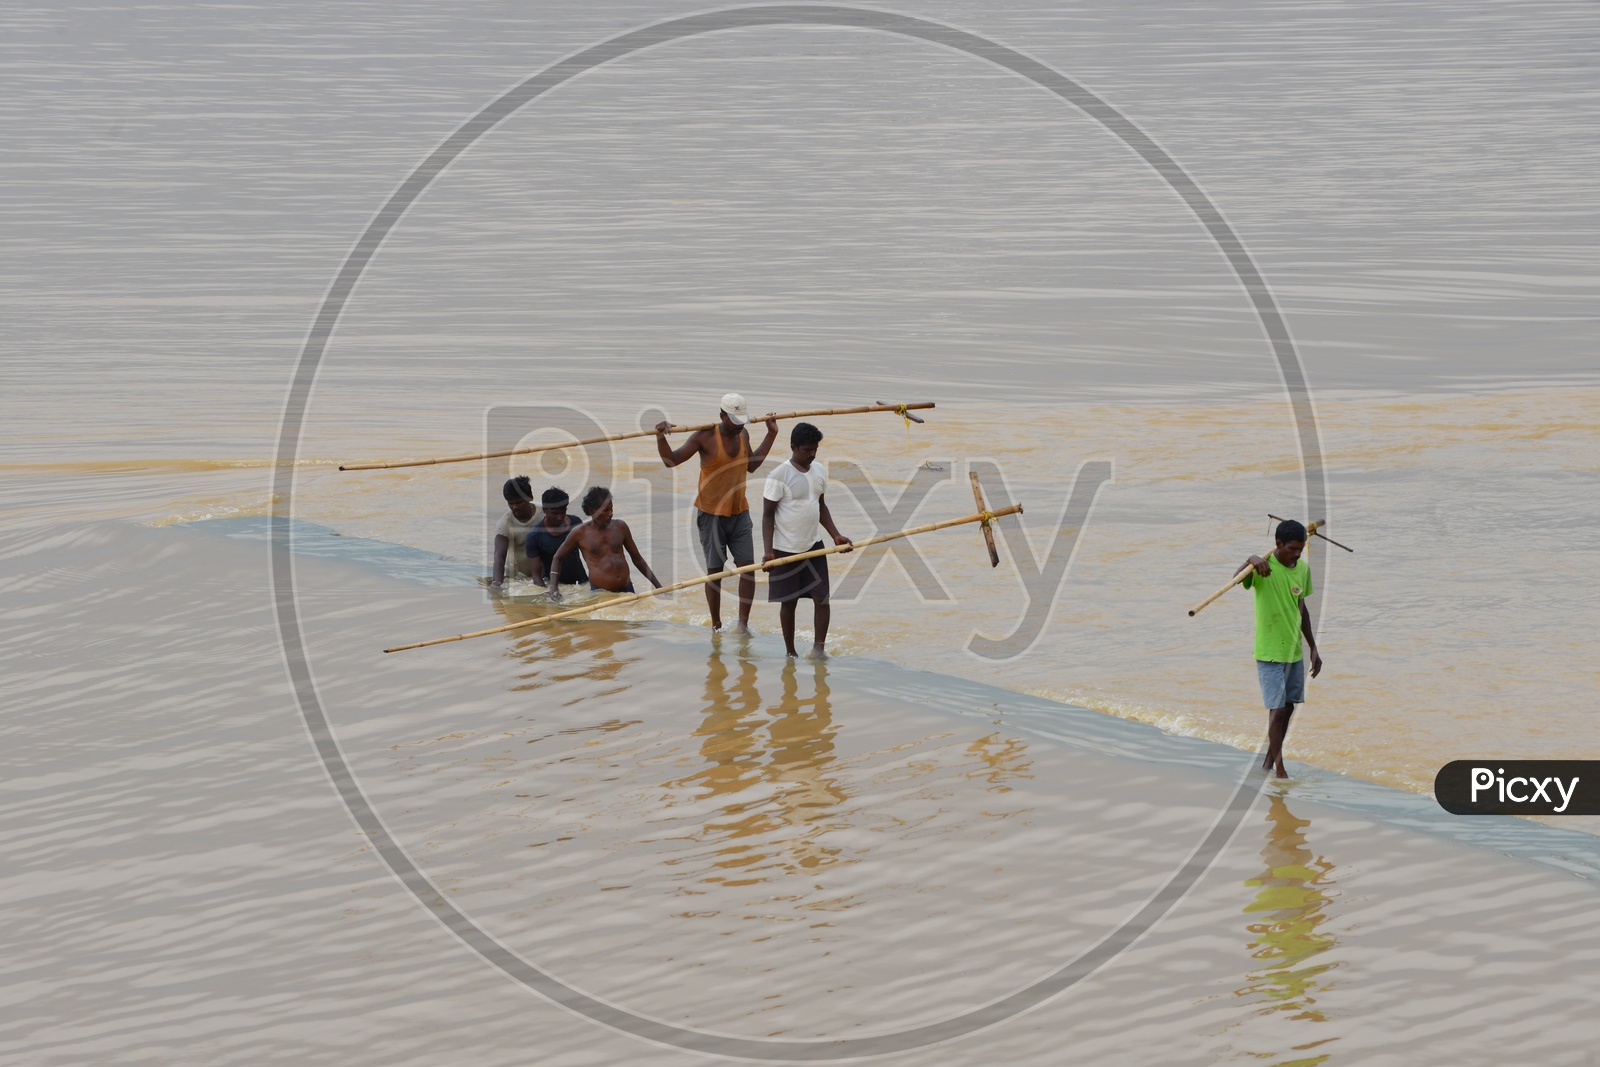 Men with wooden surf fishing rod in Krishna river